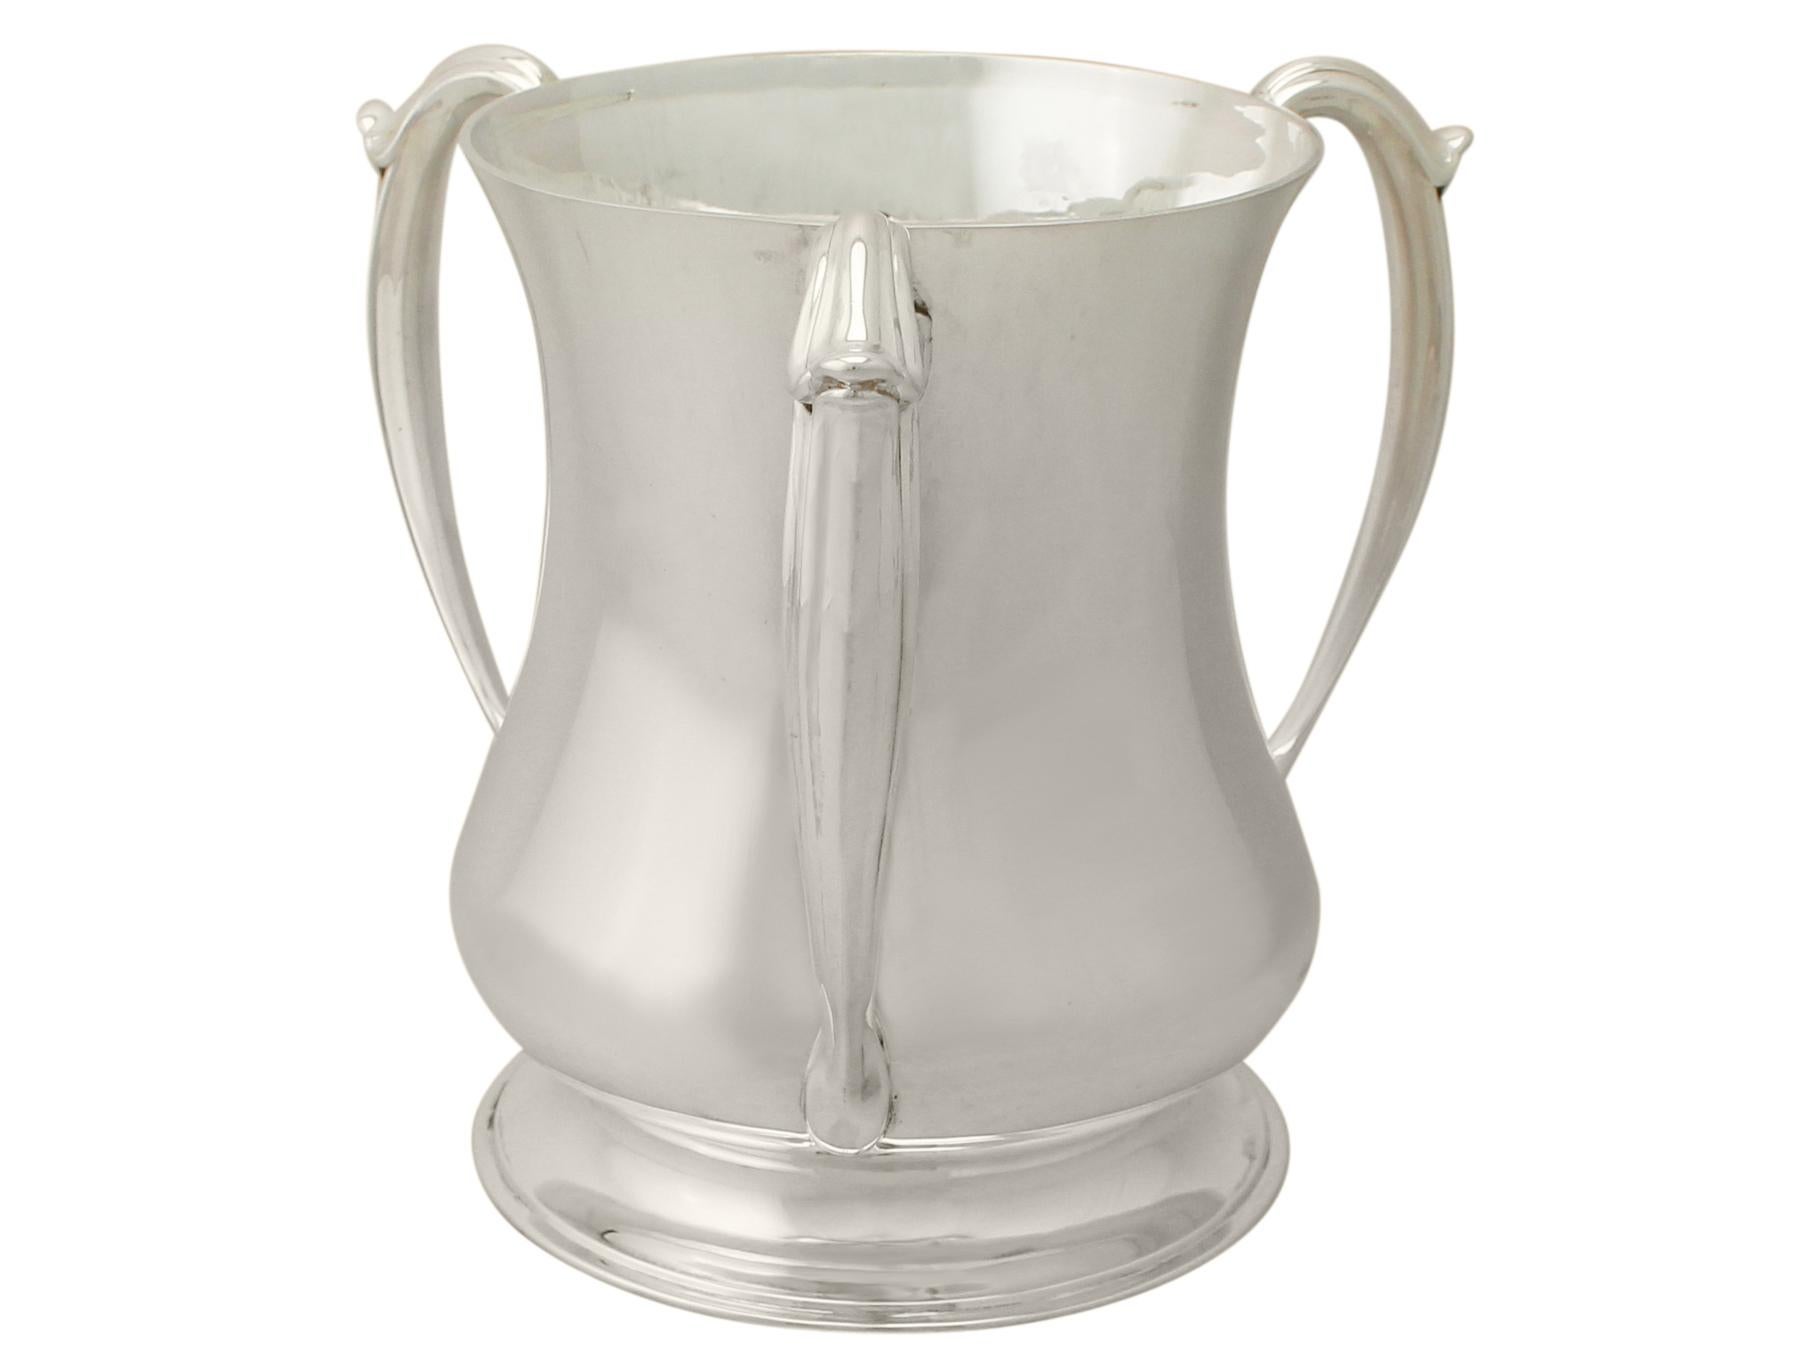 An exceptional, fine and impressive antique Edwardian English sterling silver presentation/champagne cup in the tyg and Art Nouveau style, an addition to our ornamental silverware collection.

This exceptional antique sterling silver trophy cup